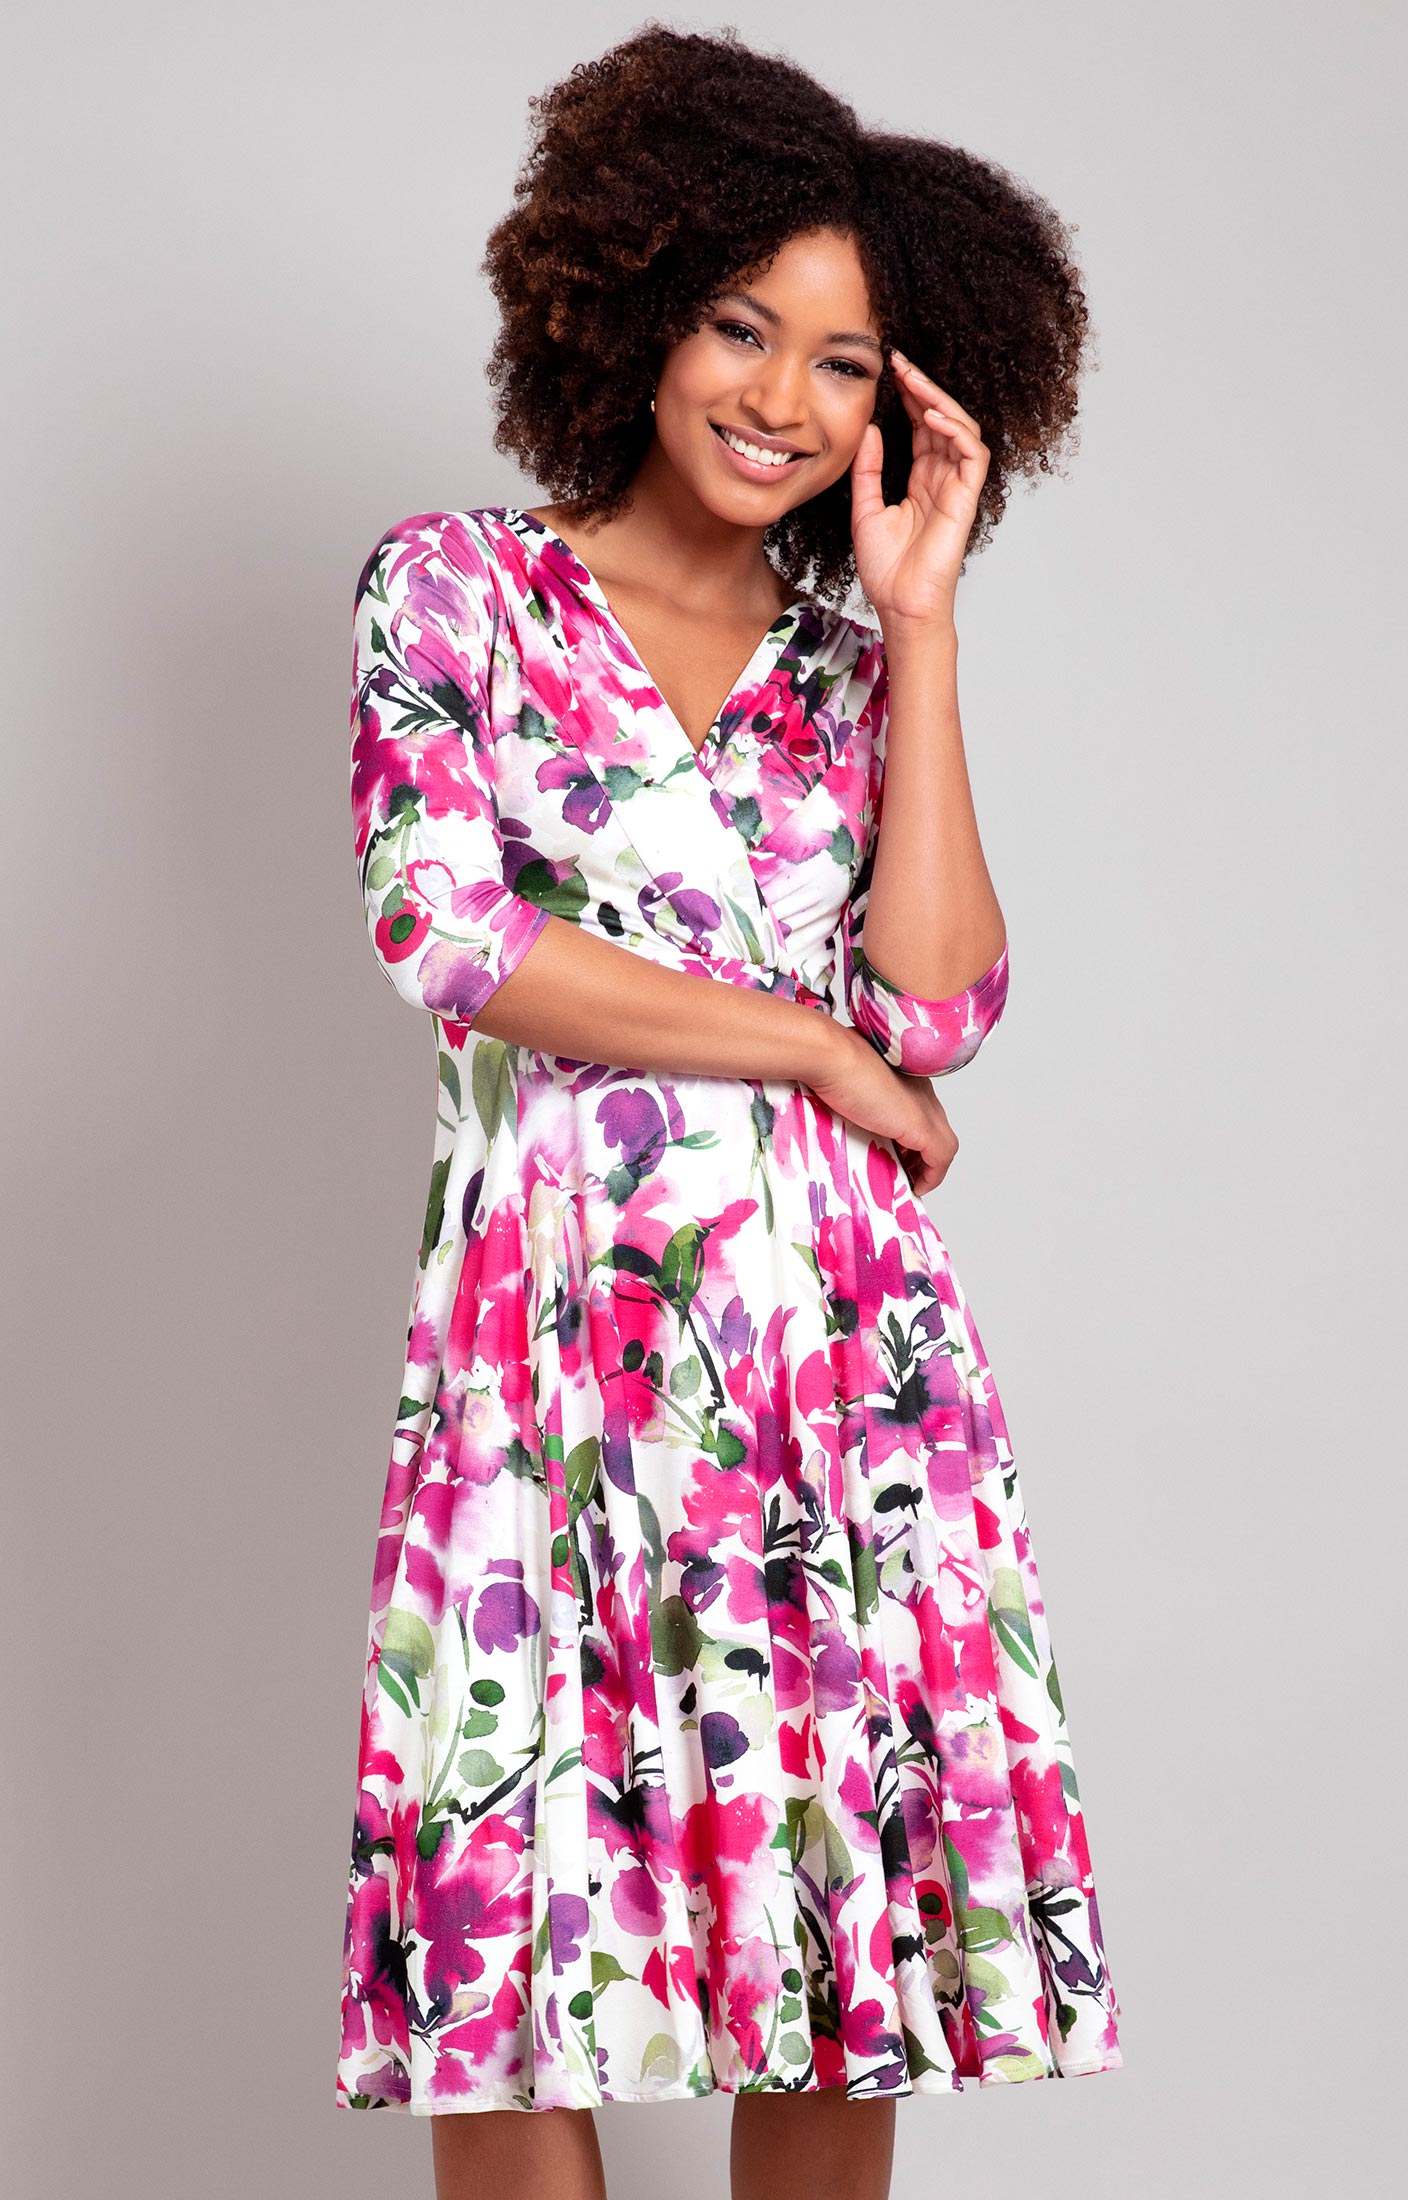 Florals Clothes by Fuchsia Evening - Wedding and Short Wear Dress Annie Alie Dresses, Party